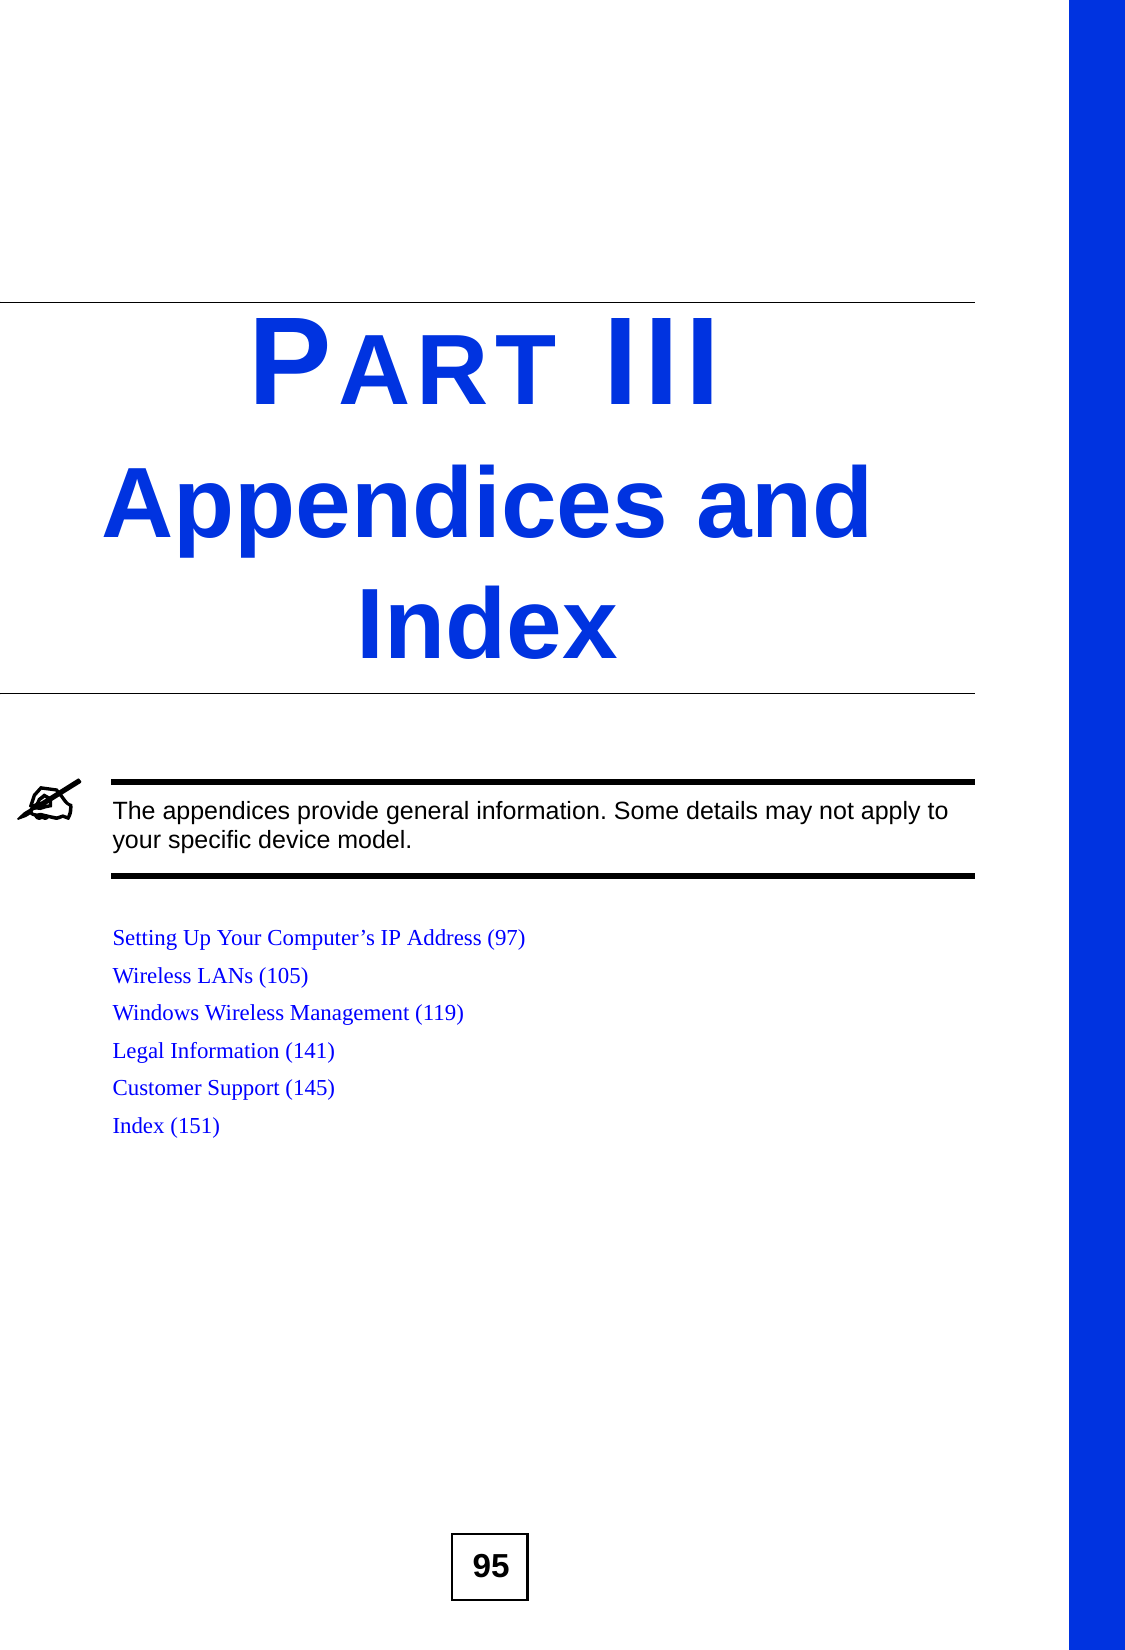 95PART IIIAppendices and Index&quot;The appendices provide general information. Some details may not apply to your specific device model.Setting Up Your Computer’s IP Address (97)Wireless LANs (105)Windows Wireless Management (119)Legal Information (141)Customer Support (145)Index (151)